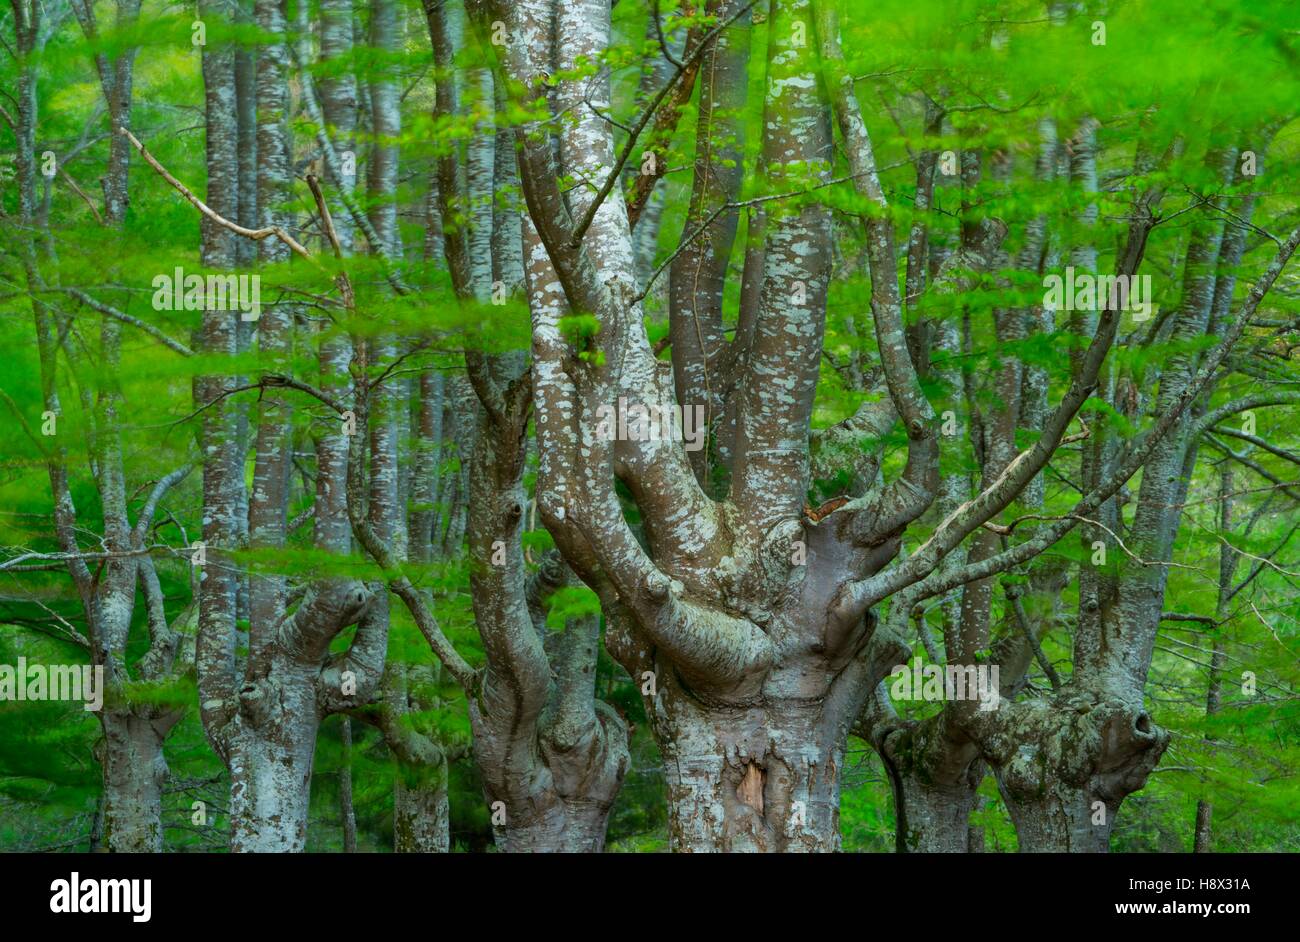 Pollarded trees, Beech forest, Sarria, Gorbeia Natural Park, Alava, Basque Country, Spain Stock Photo